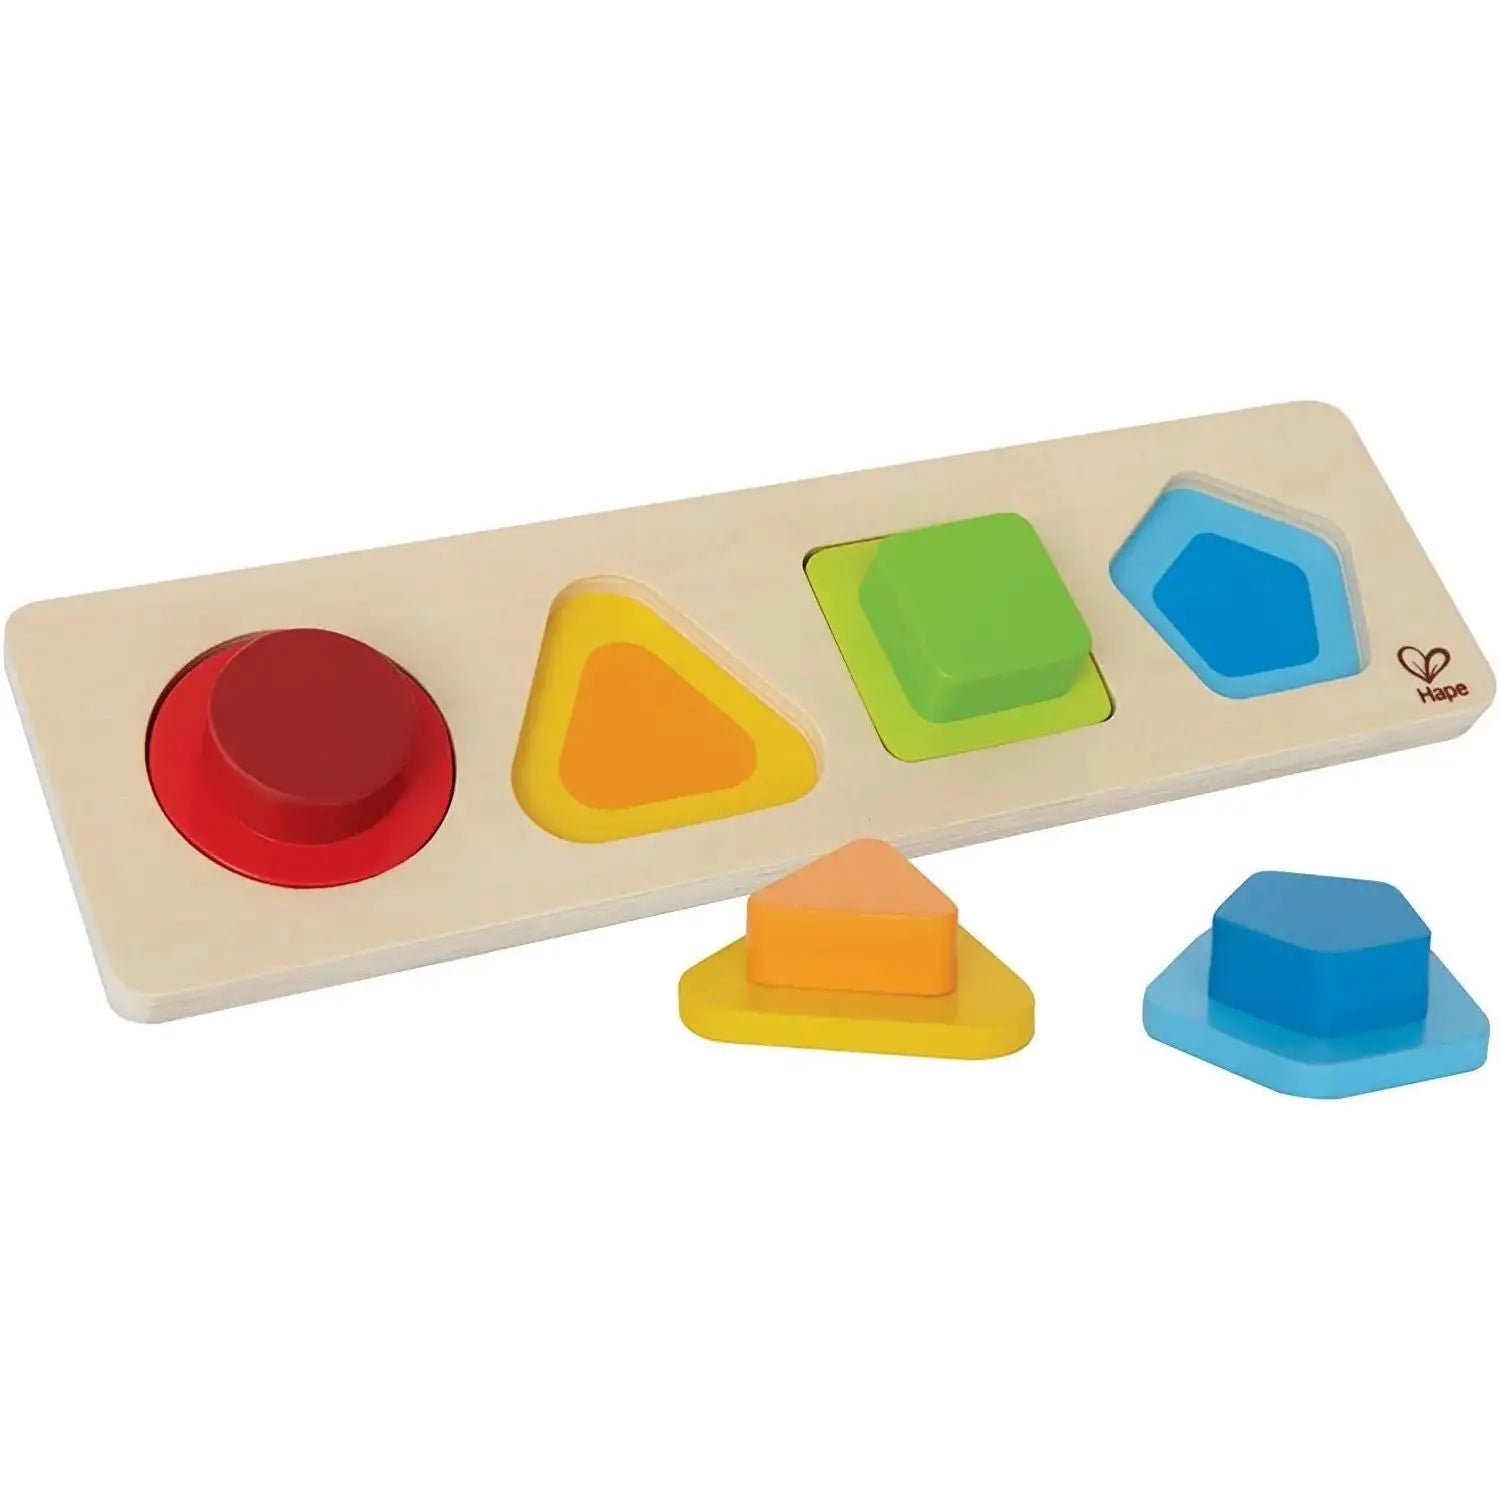 Hape First Shpes Puzzle